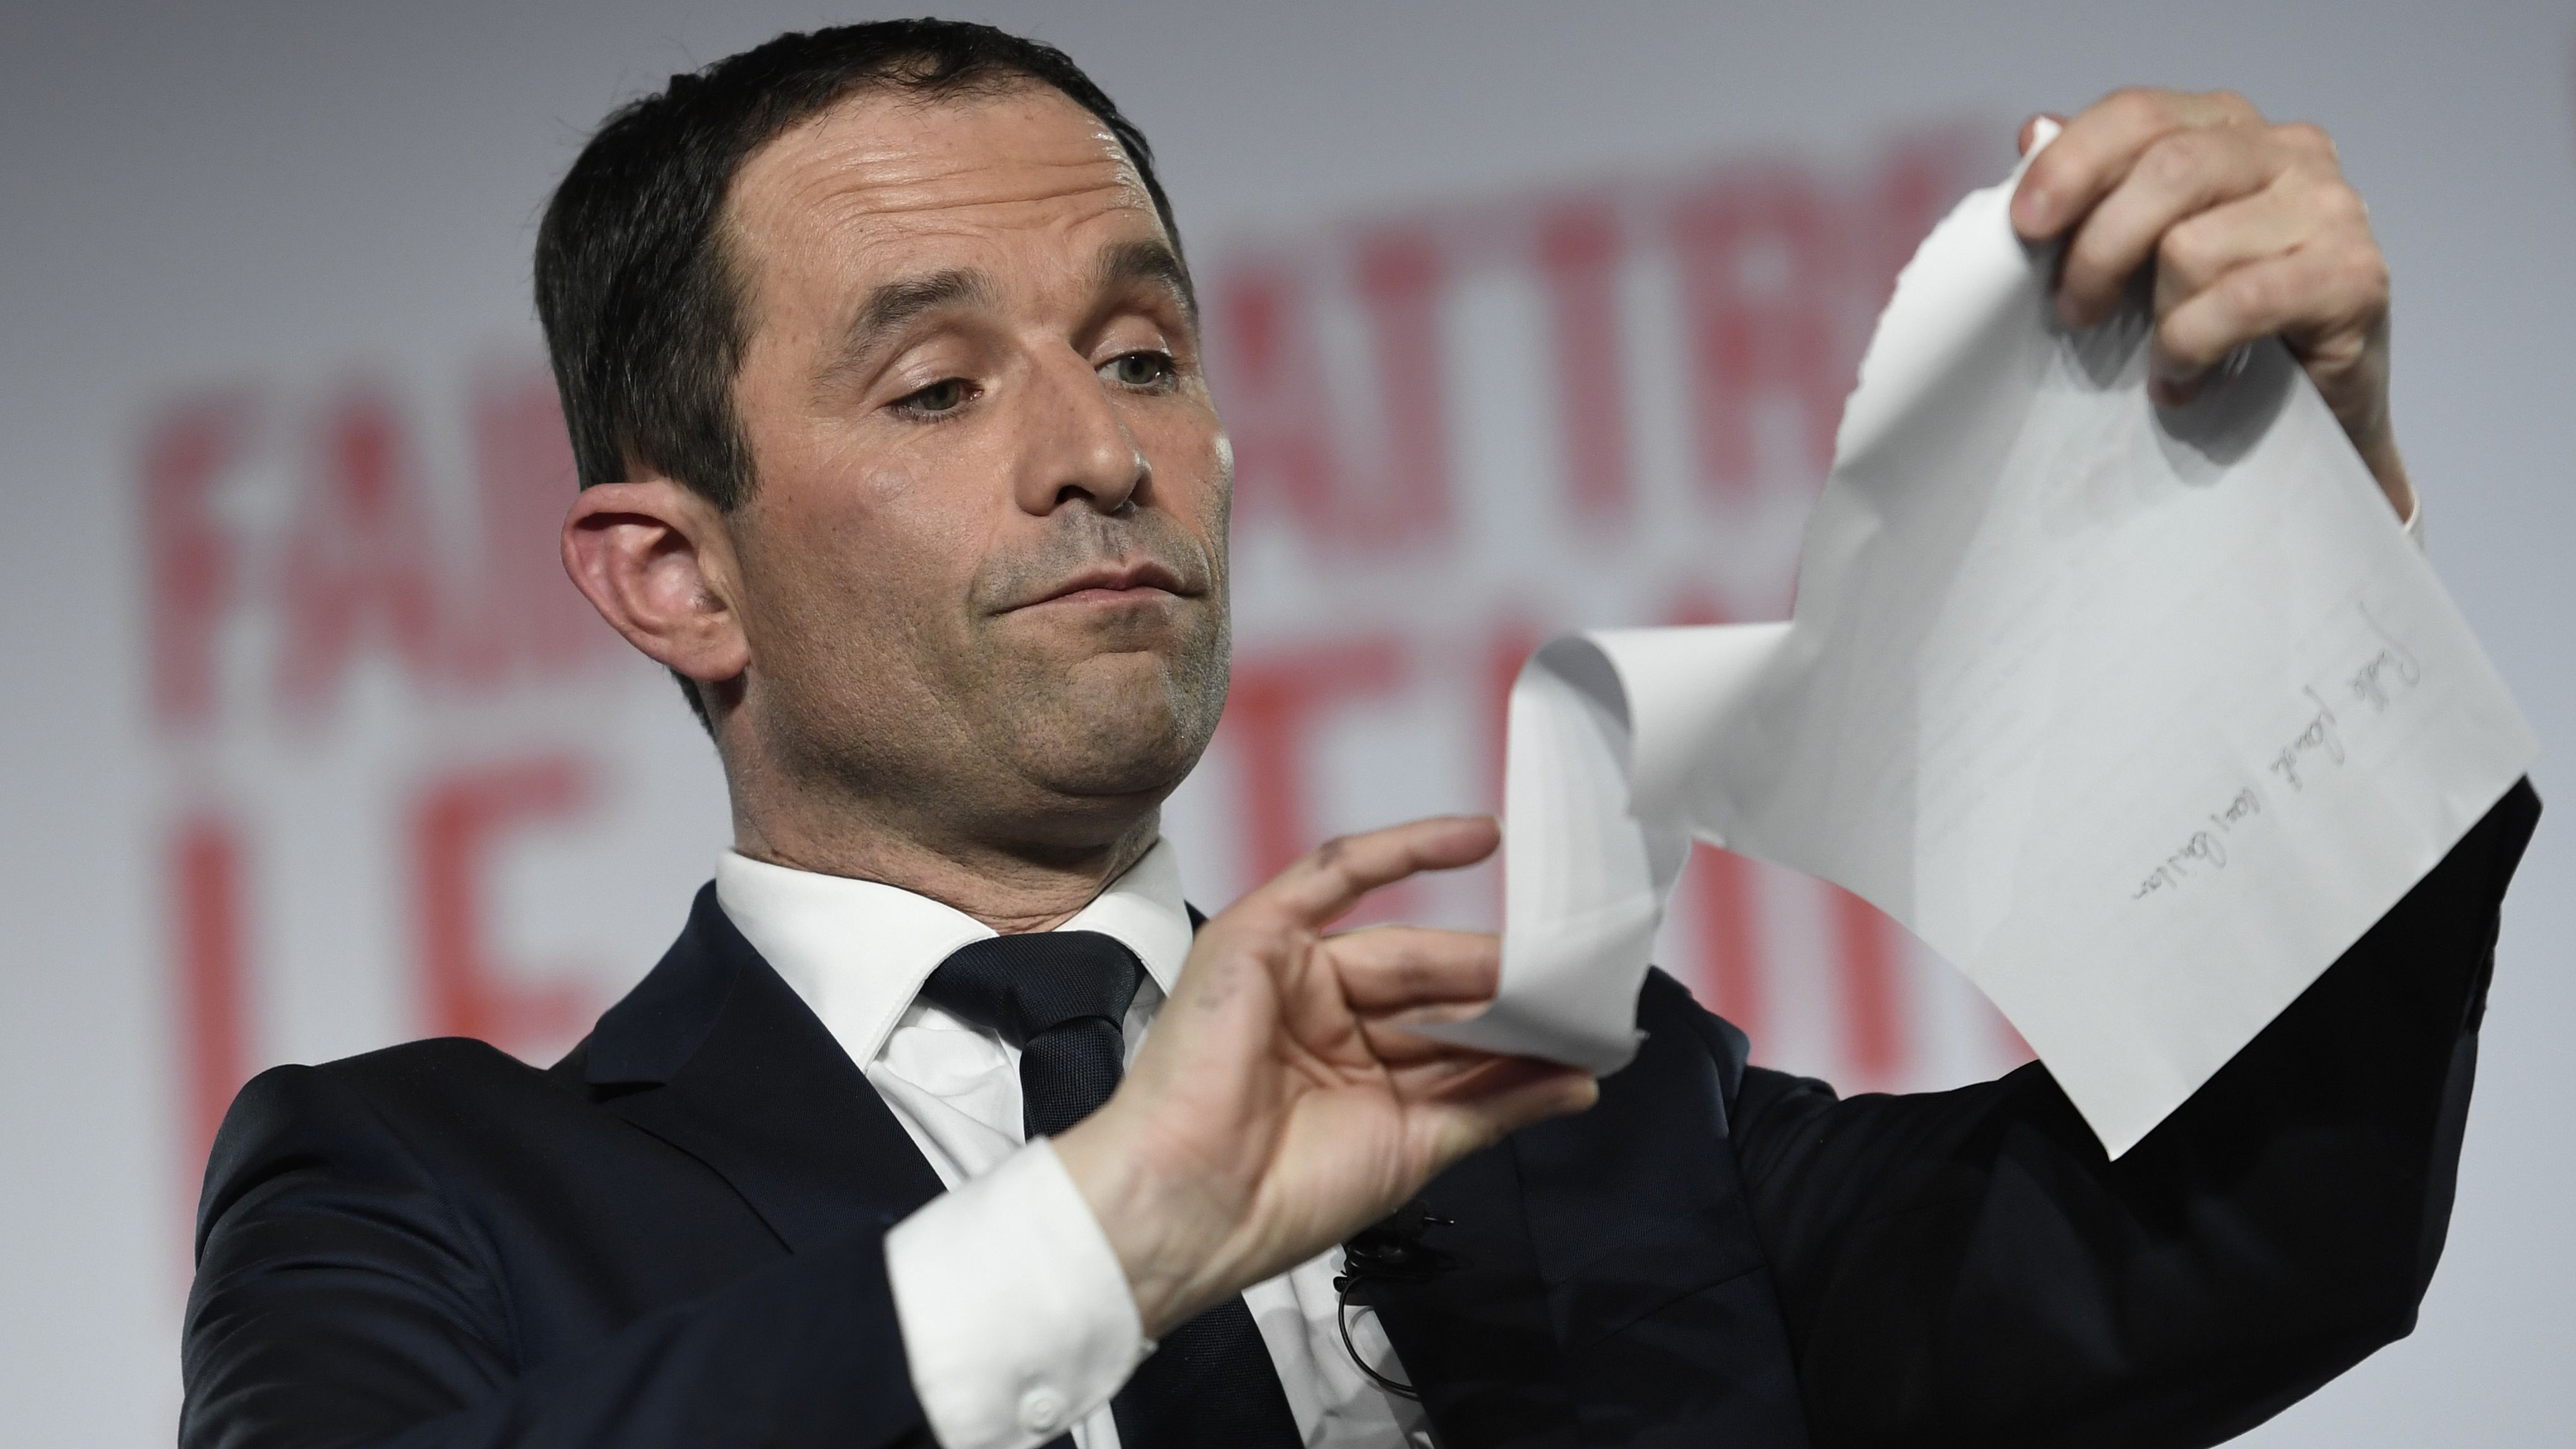 Benoit Hamon is aiming to write a new chapter in French political history.